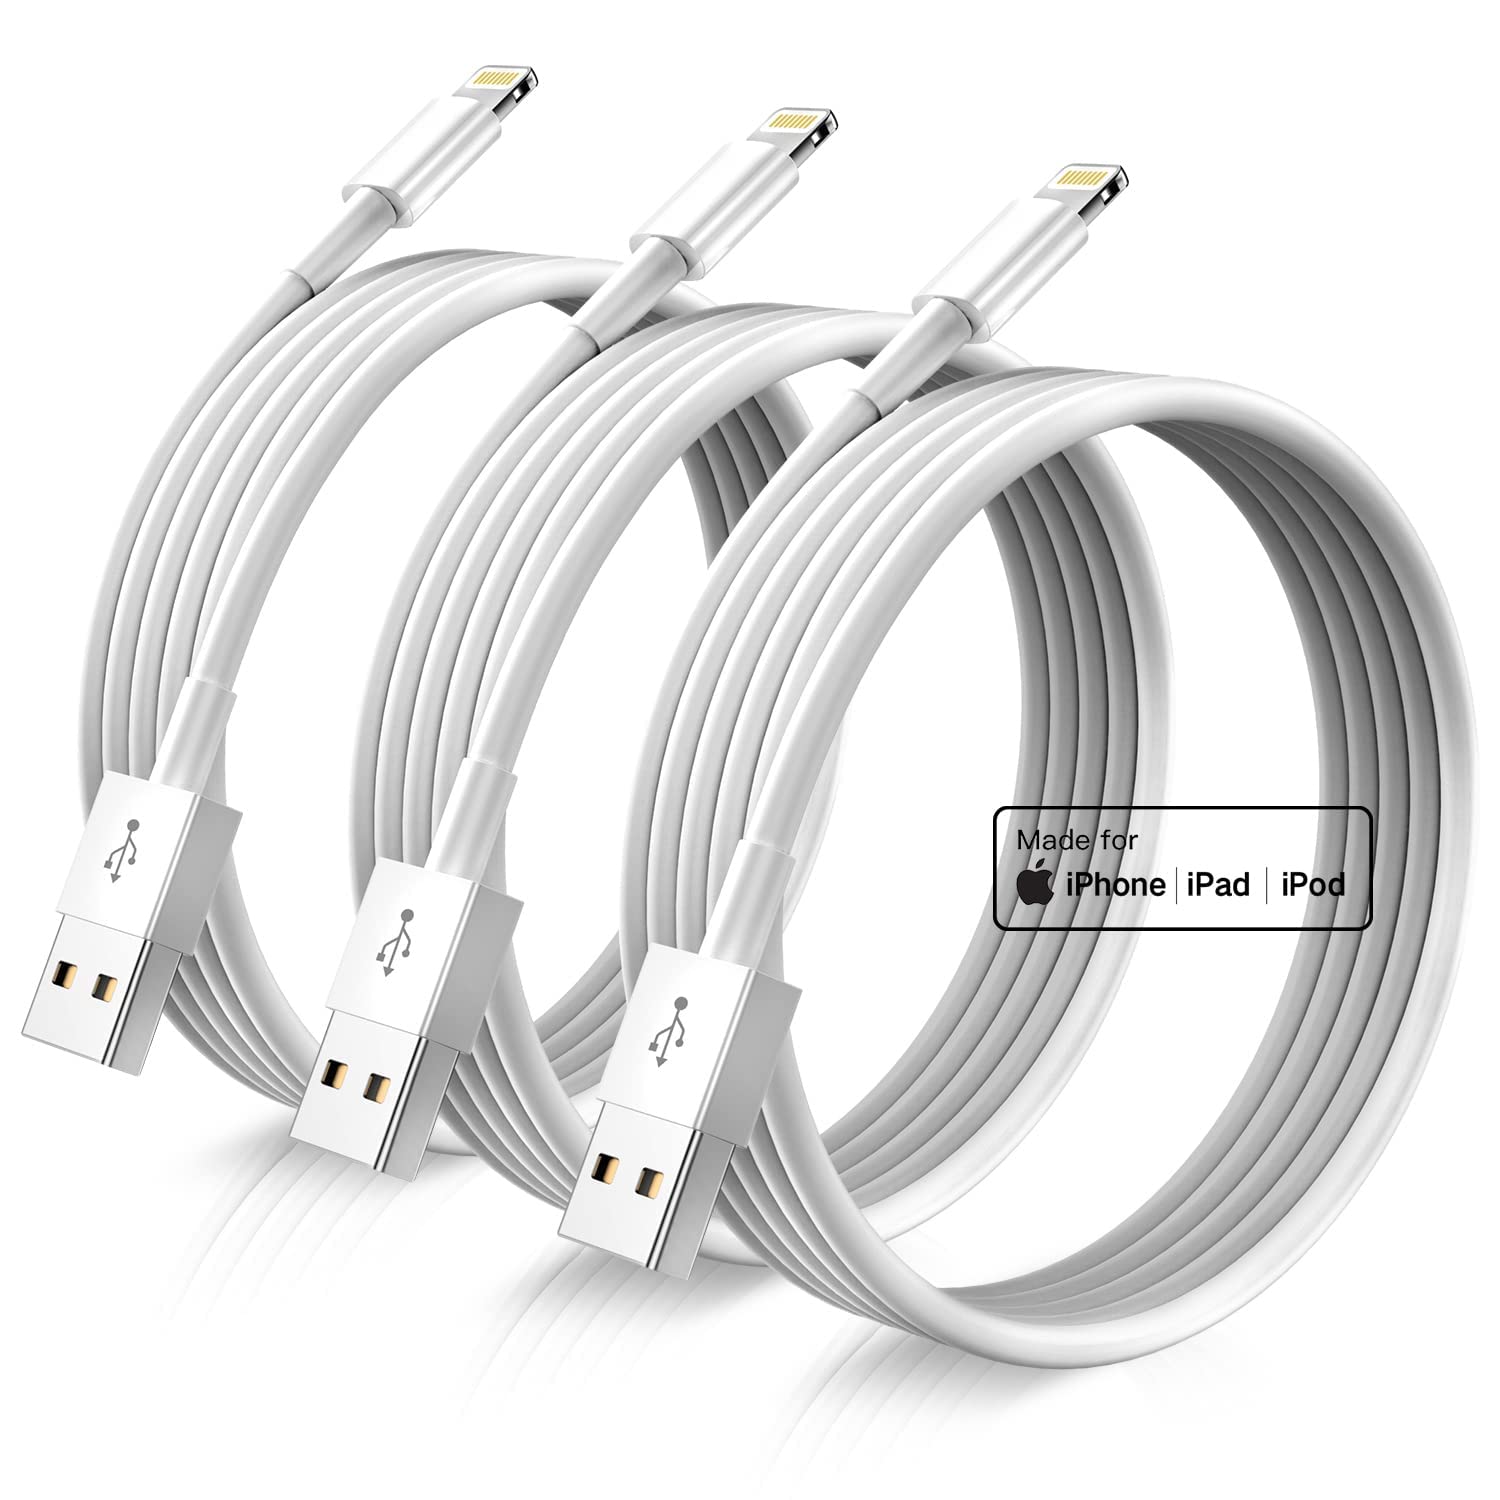 iPhone Charger Cord Lightning Cables, Original [3Pack [...]